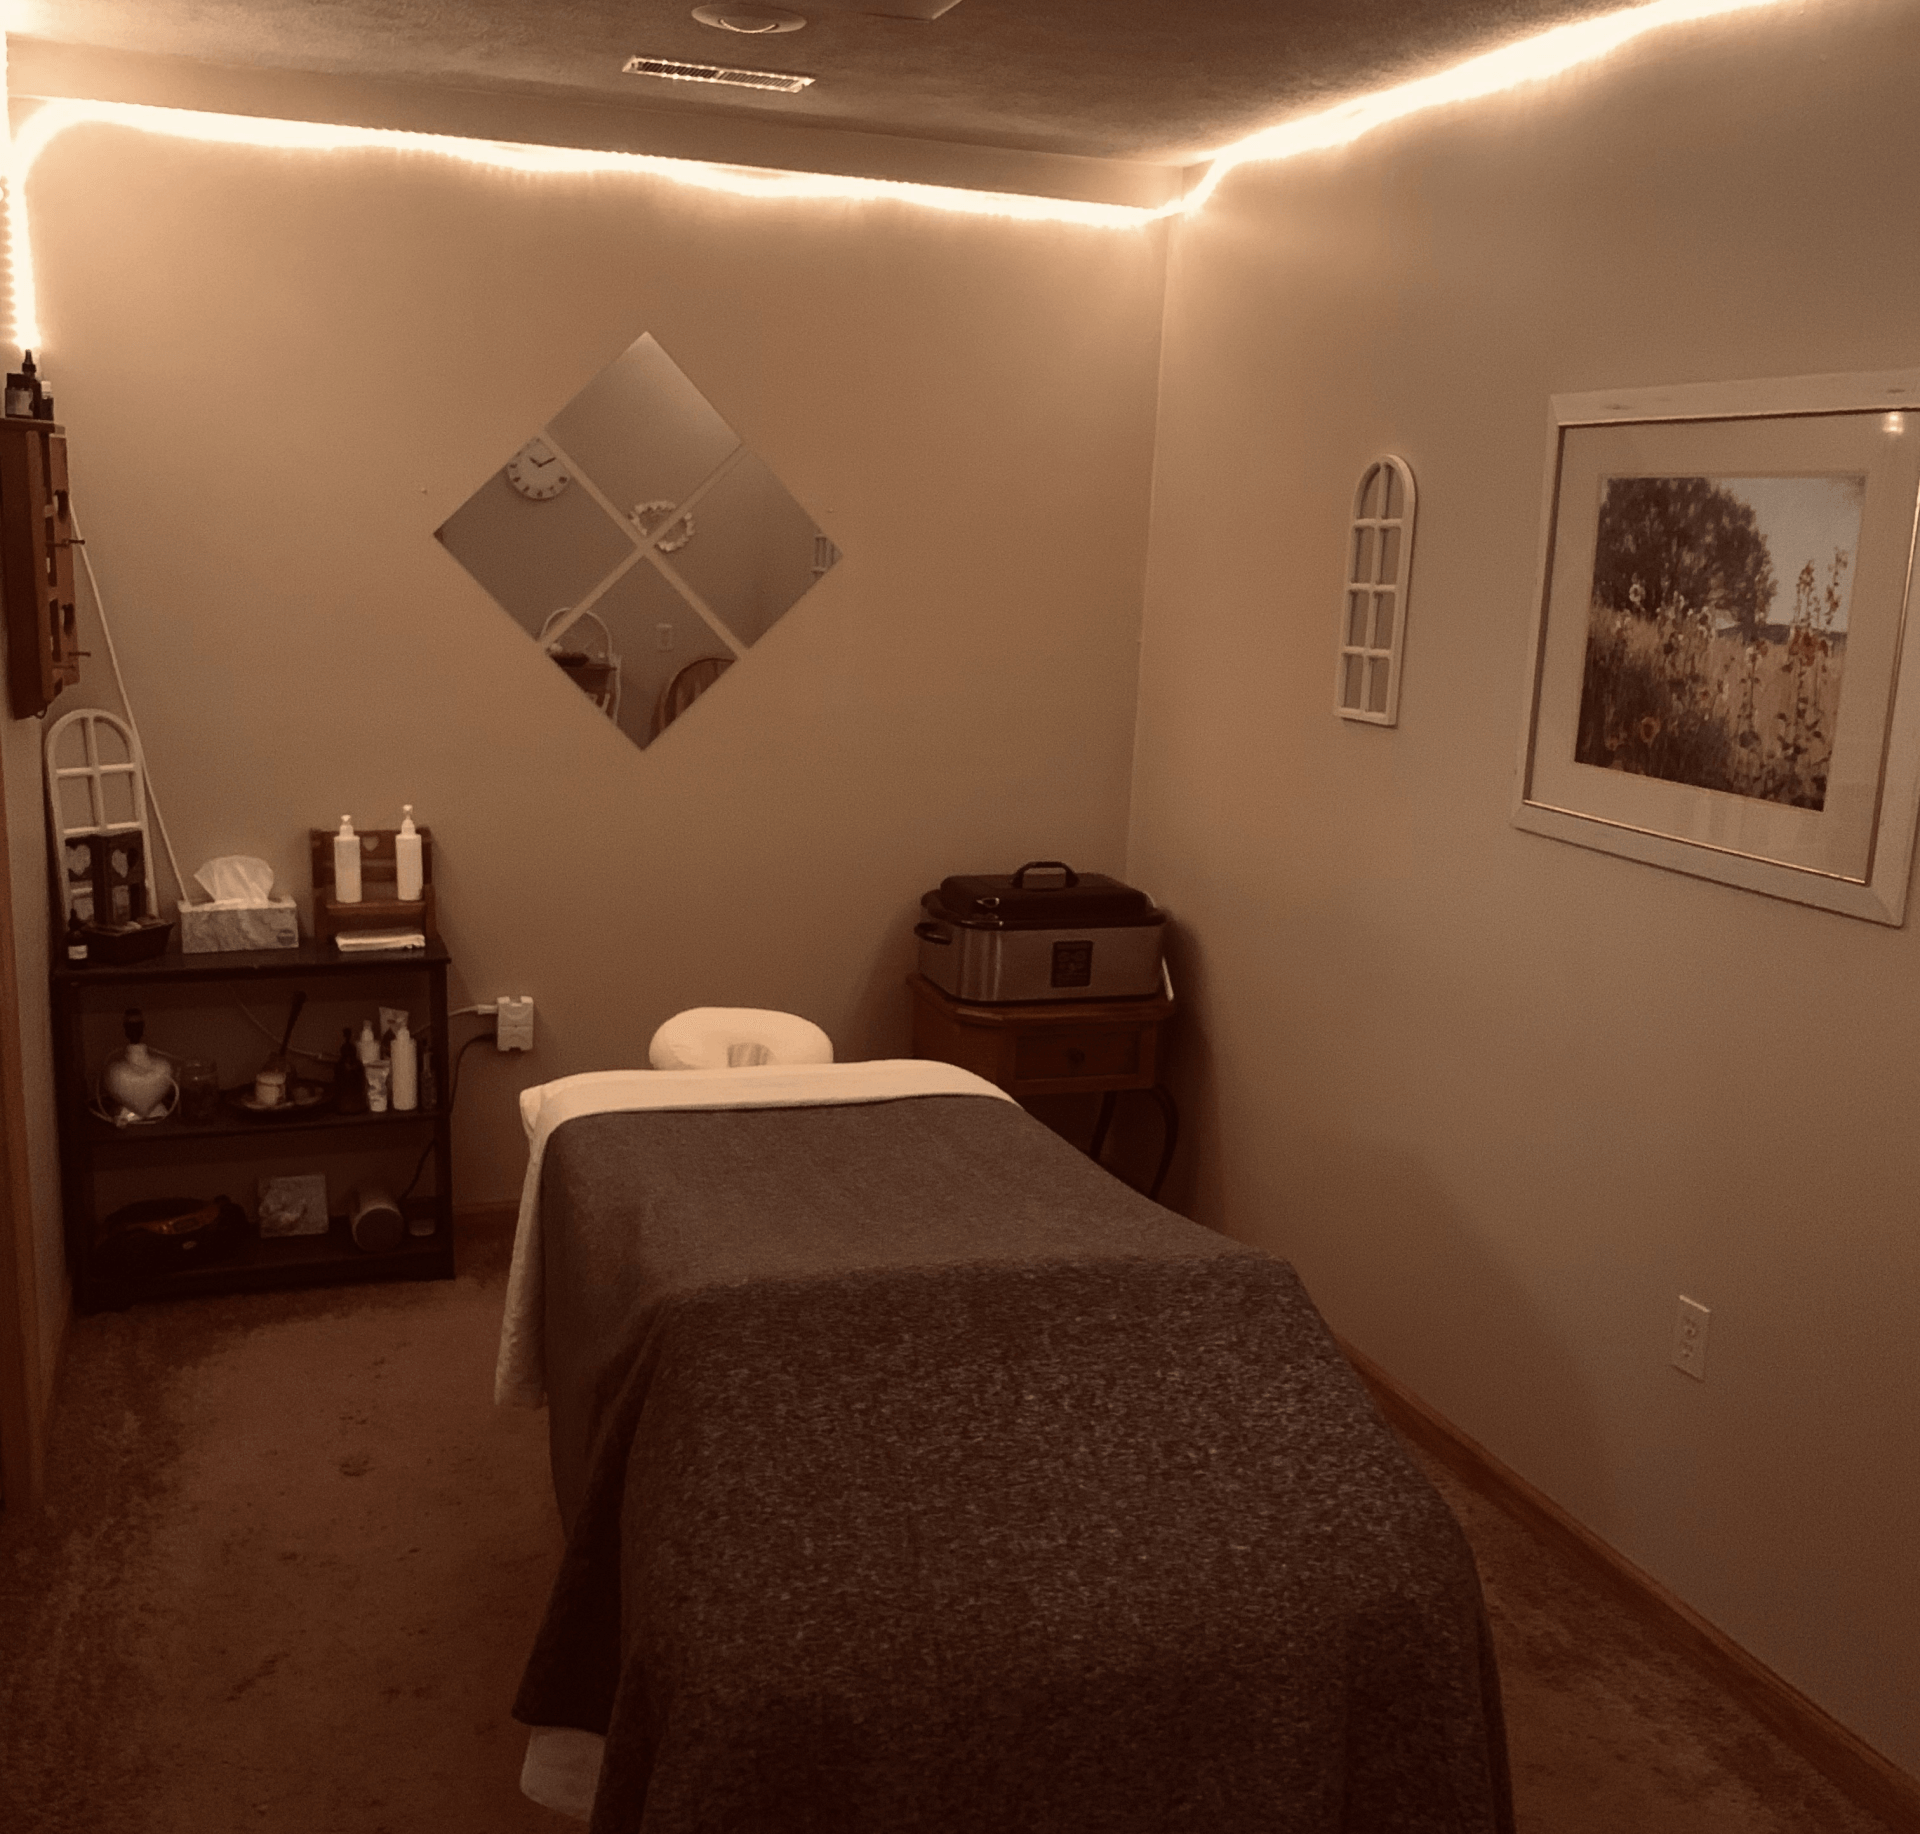 massage therapy room